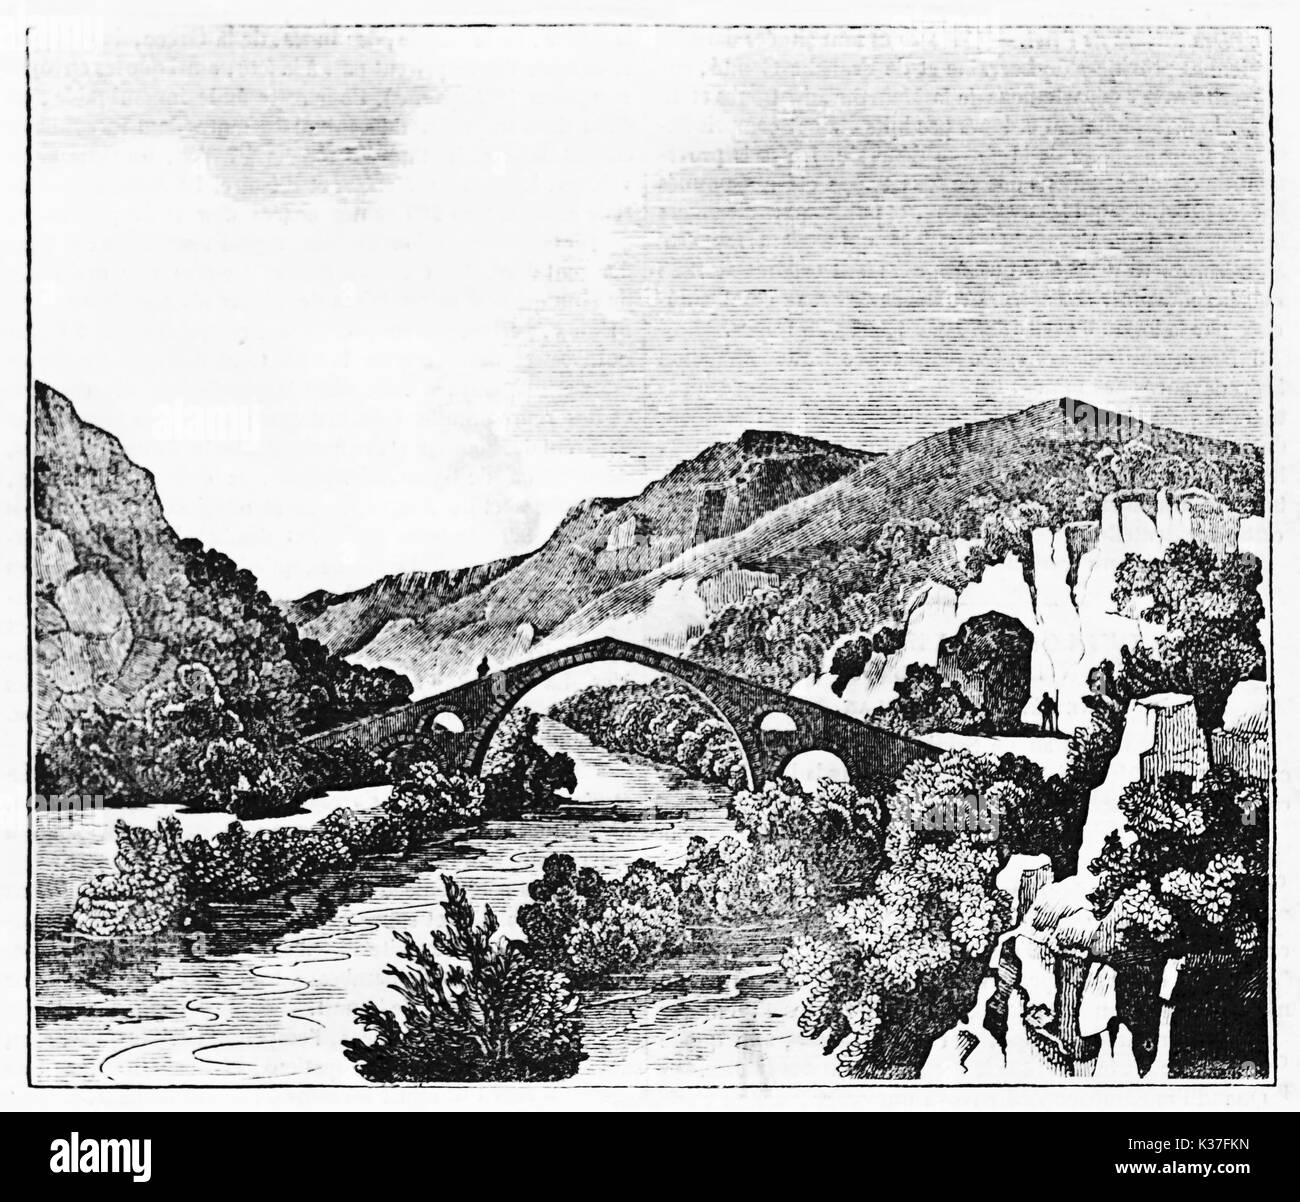 Ancient medieval gothic bridge crossing a river surrounded by vegetation, Eurotas river in Laconia Greece. Old Illustration by unidentified author published on Magasin Pittoresque Paris 1834. Stock Photo